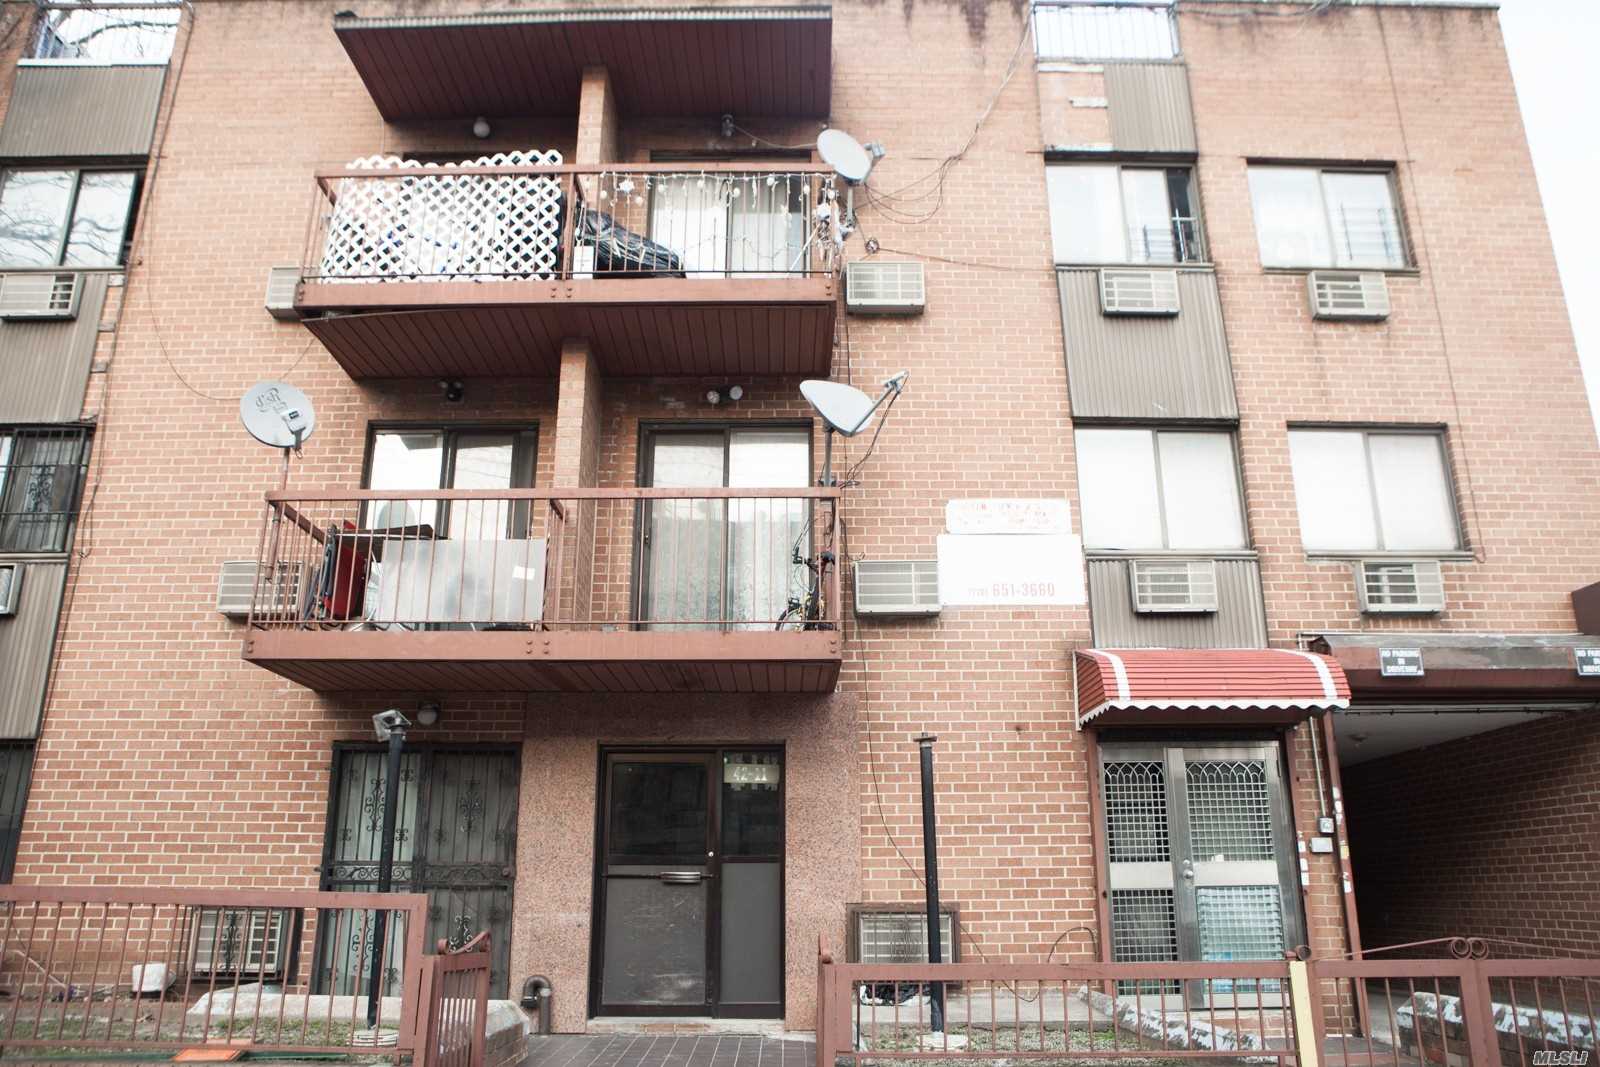 Cozy first floor studio condo in an excellent location, one blocks from the 7 train, 15 minutes to Flushing and 30 minutes to Manhattan. Plenty of shopping and restaurant close by. Private patio area. Good for investment or primary residence. Don&rsquo;t miss this chance!